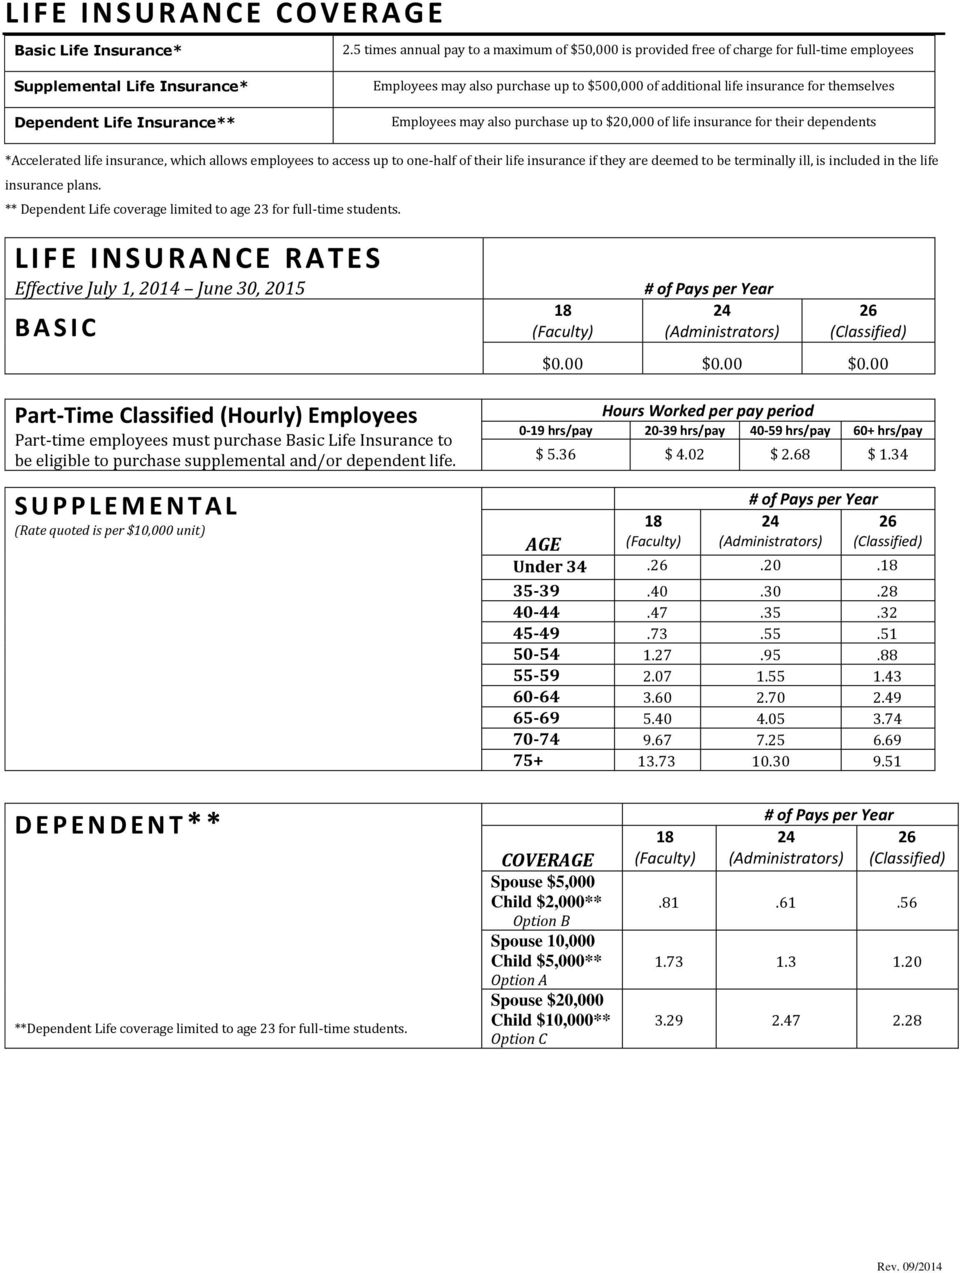 additional life insurance for themselves Employees may also purchase up to $20,000 of life insurance for their dependents *Accelerated life insurance, which allows employees to access up to one-half